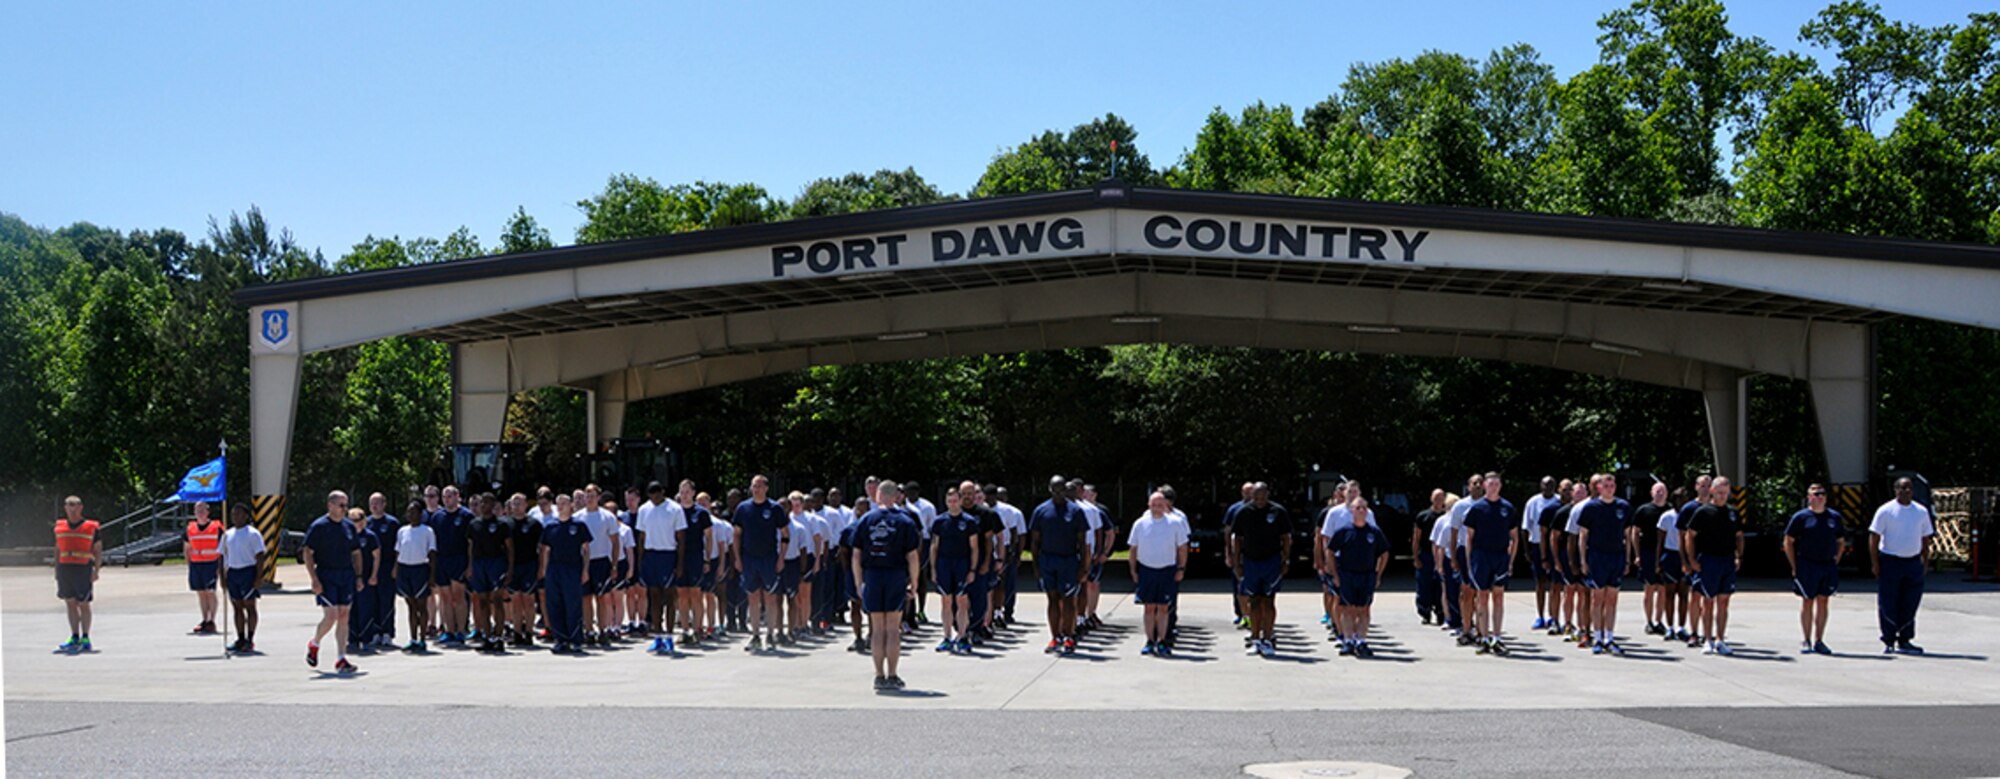 Chief Master Sgt. Jeffrey Herold, 80th Aerial Port Squadron operations superintendent, reminds members to embrace the wingman concept and take care of one another during the 2nd Annual Port Dawg Memorial Run May 15, 2016 on Dobbins Air Reserve Base, Georgia. The one-mile run is in honor of their fallen, both on and off the battlefield. During National Defense Transportation week, aerial port squadrons across the U.S. Air Force take this time to pay respect to those in their career field who have made the ultimate sacrifice. (U.S. Air Force photo/Master Sgt. James Branch)